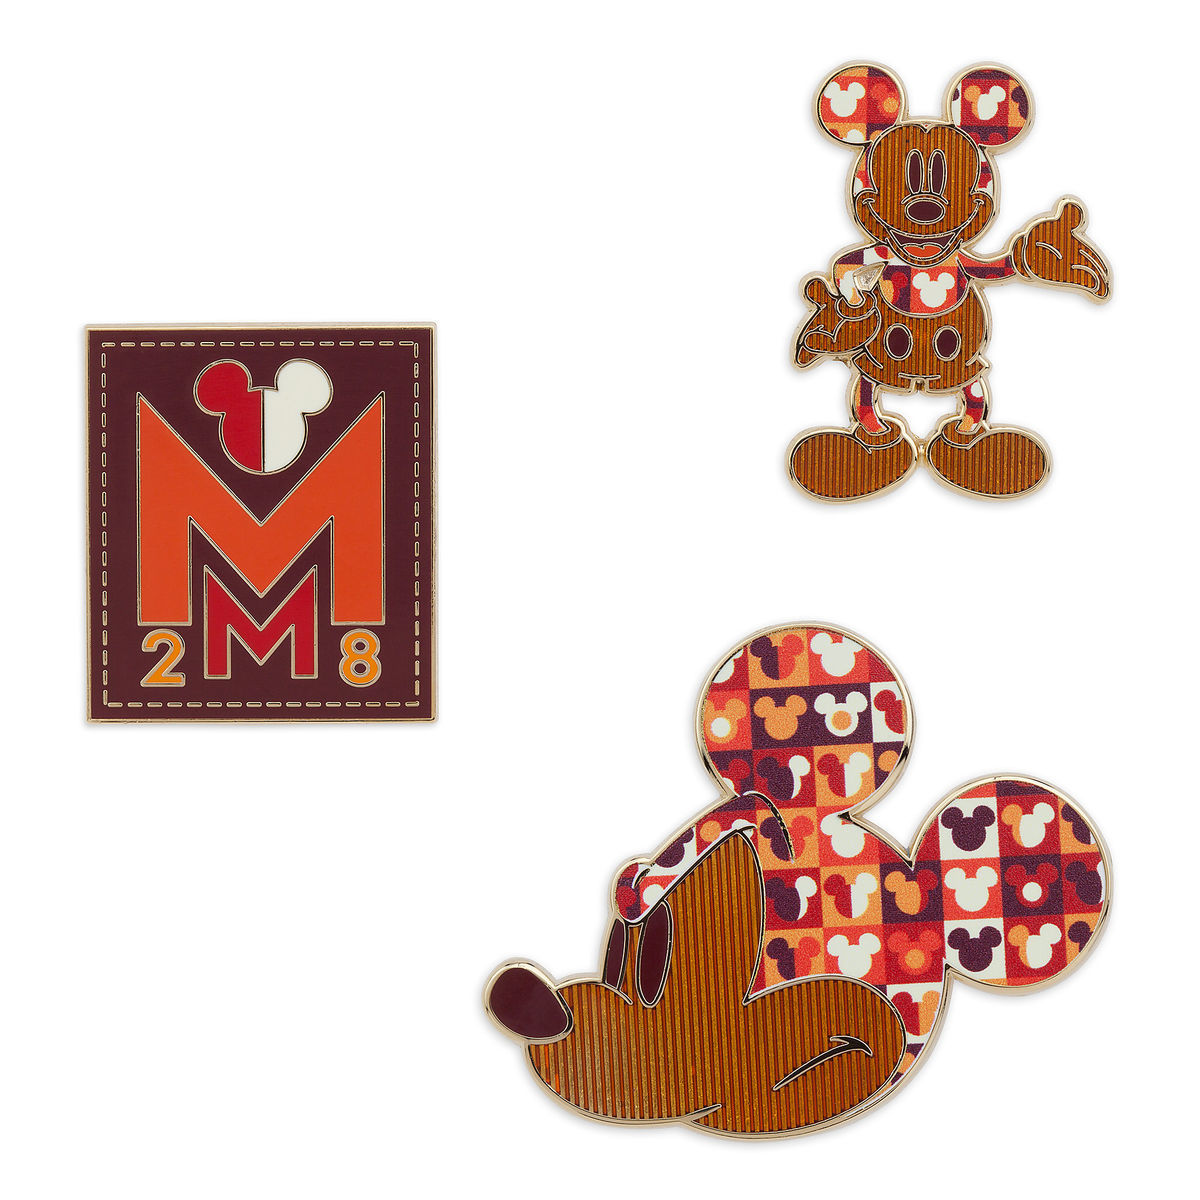 Disney Store Mickey Memories July Pin Set of 3 Limited Release New with Card